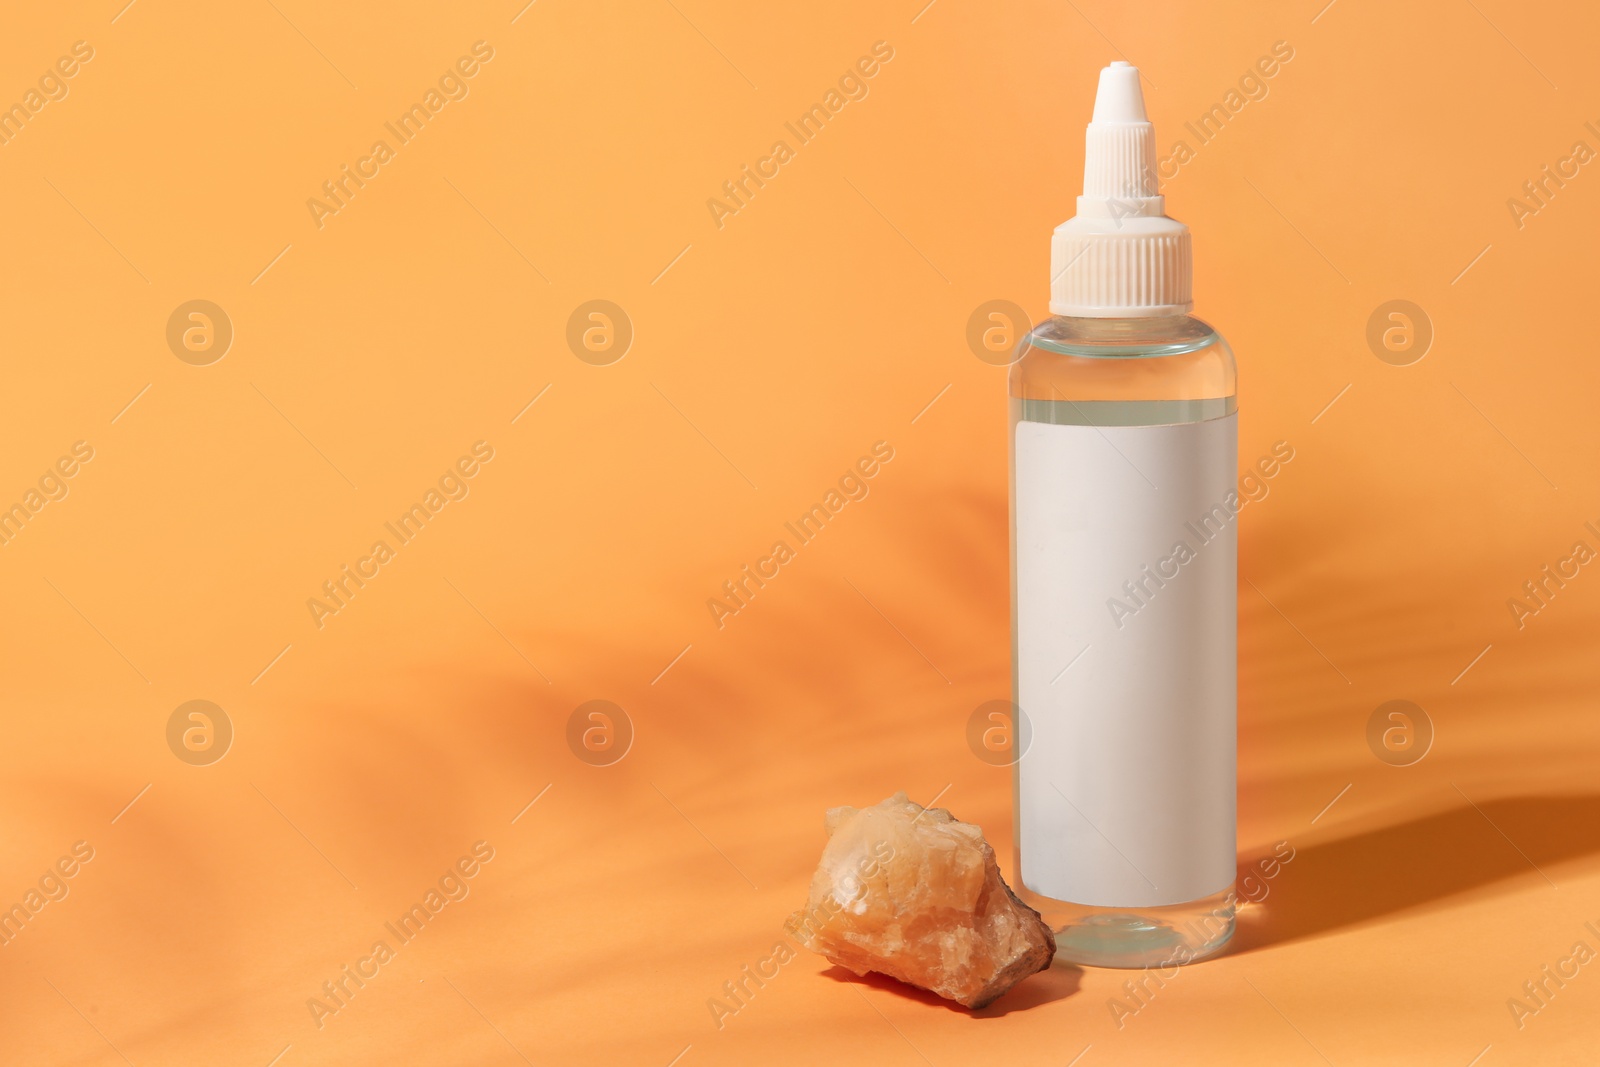 Photo of Cosmetic product and quartz gemstone on orange background, space for text